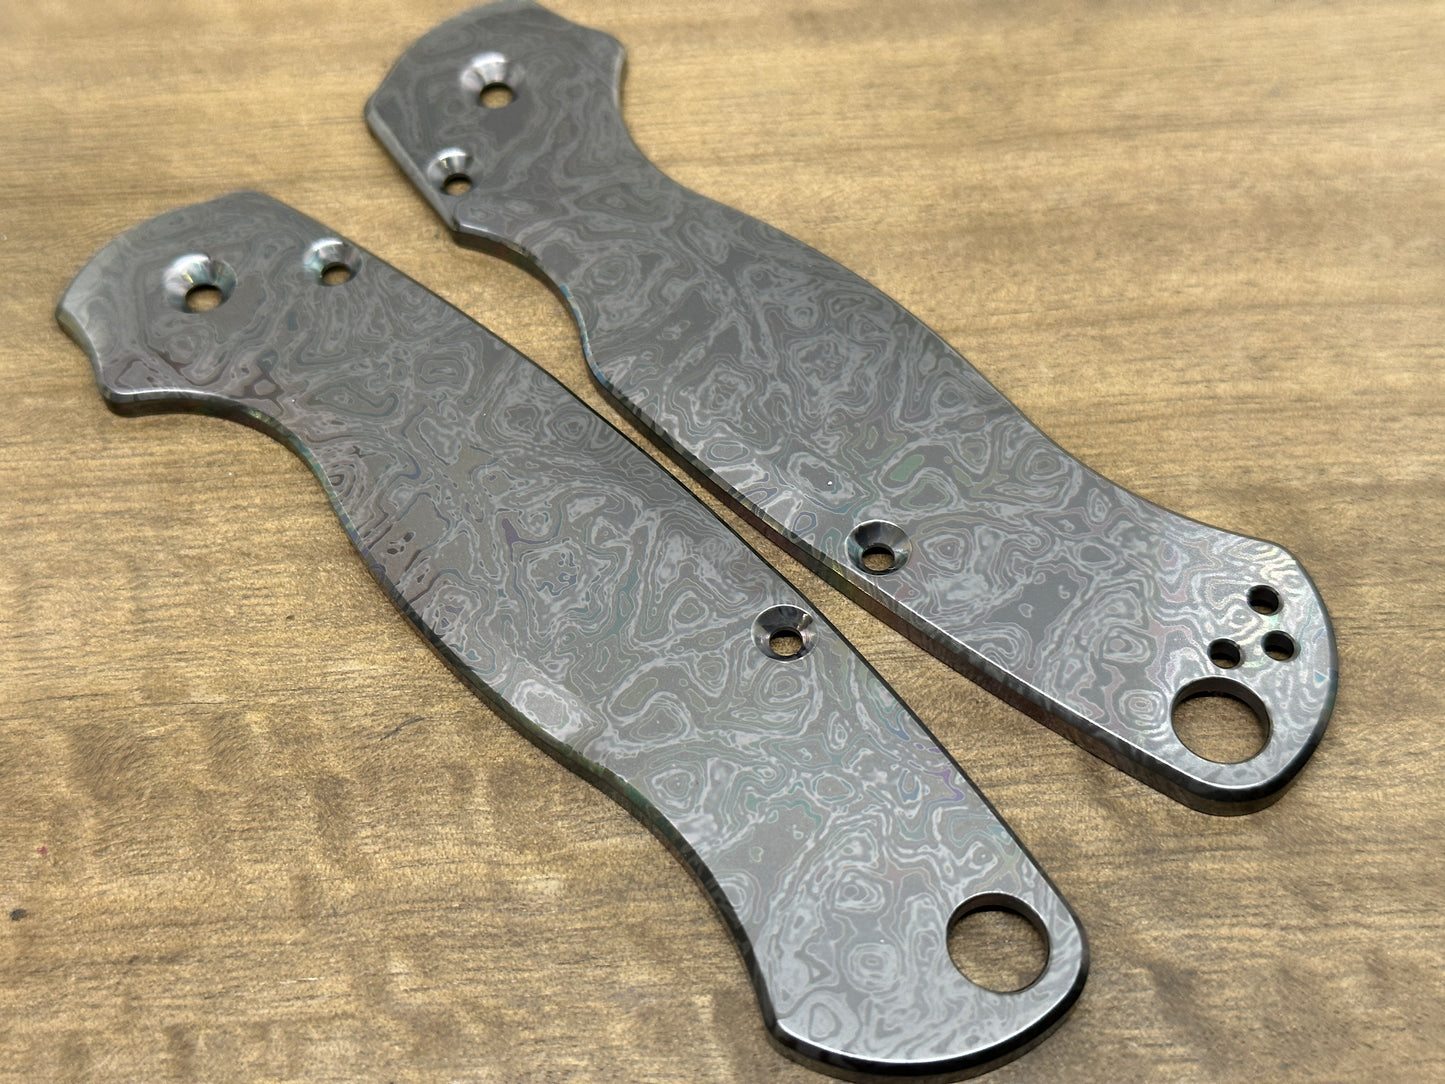 ALIEN Polished engraved Zirconium scales for Spyderco Paramilitary 2 PM2